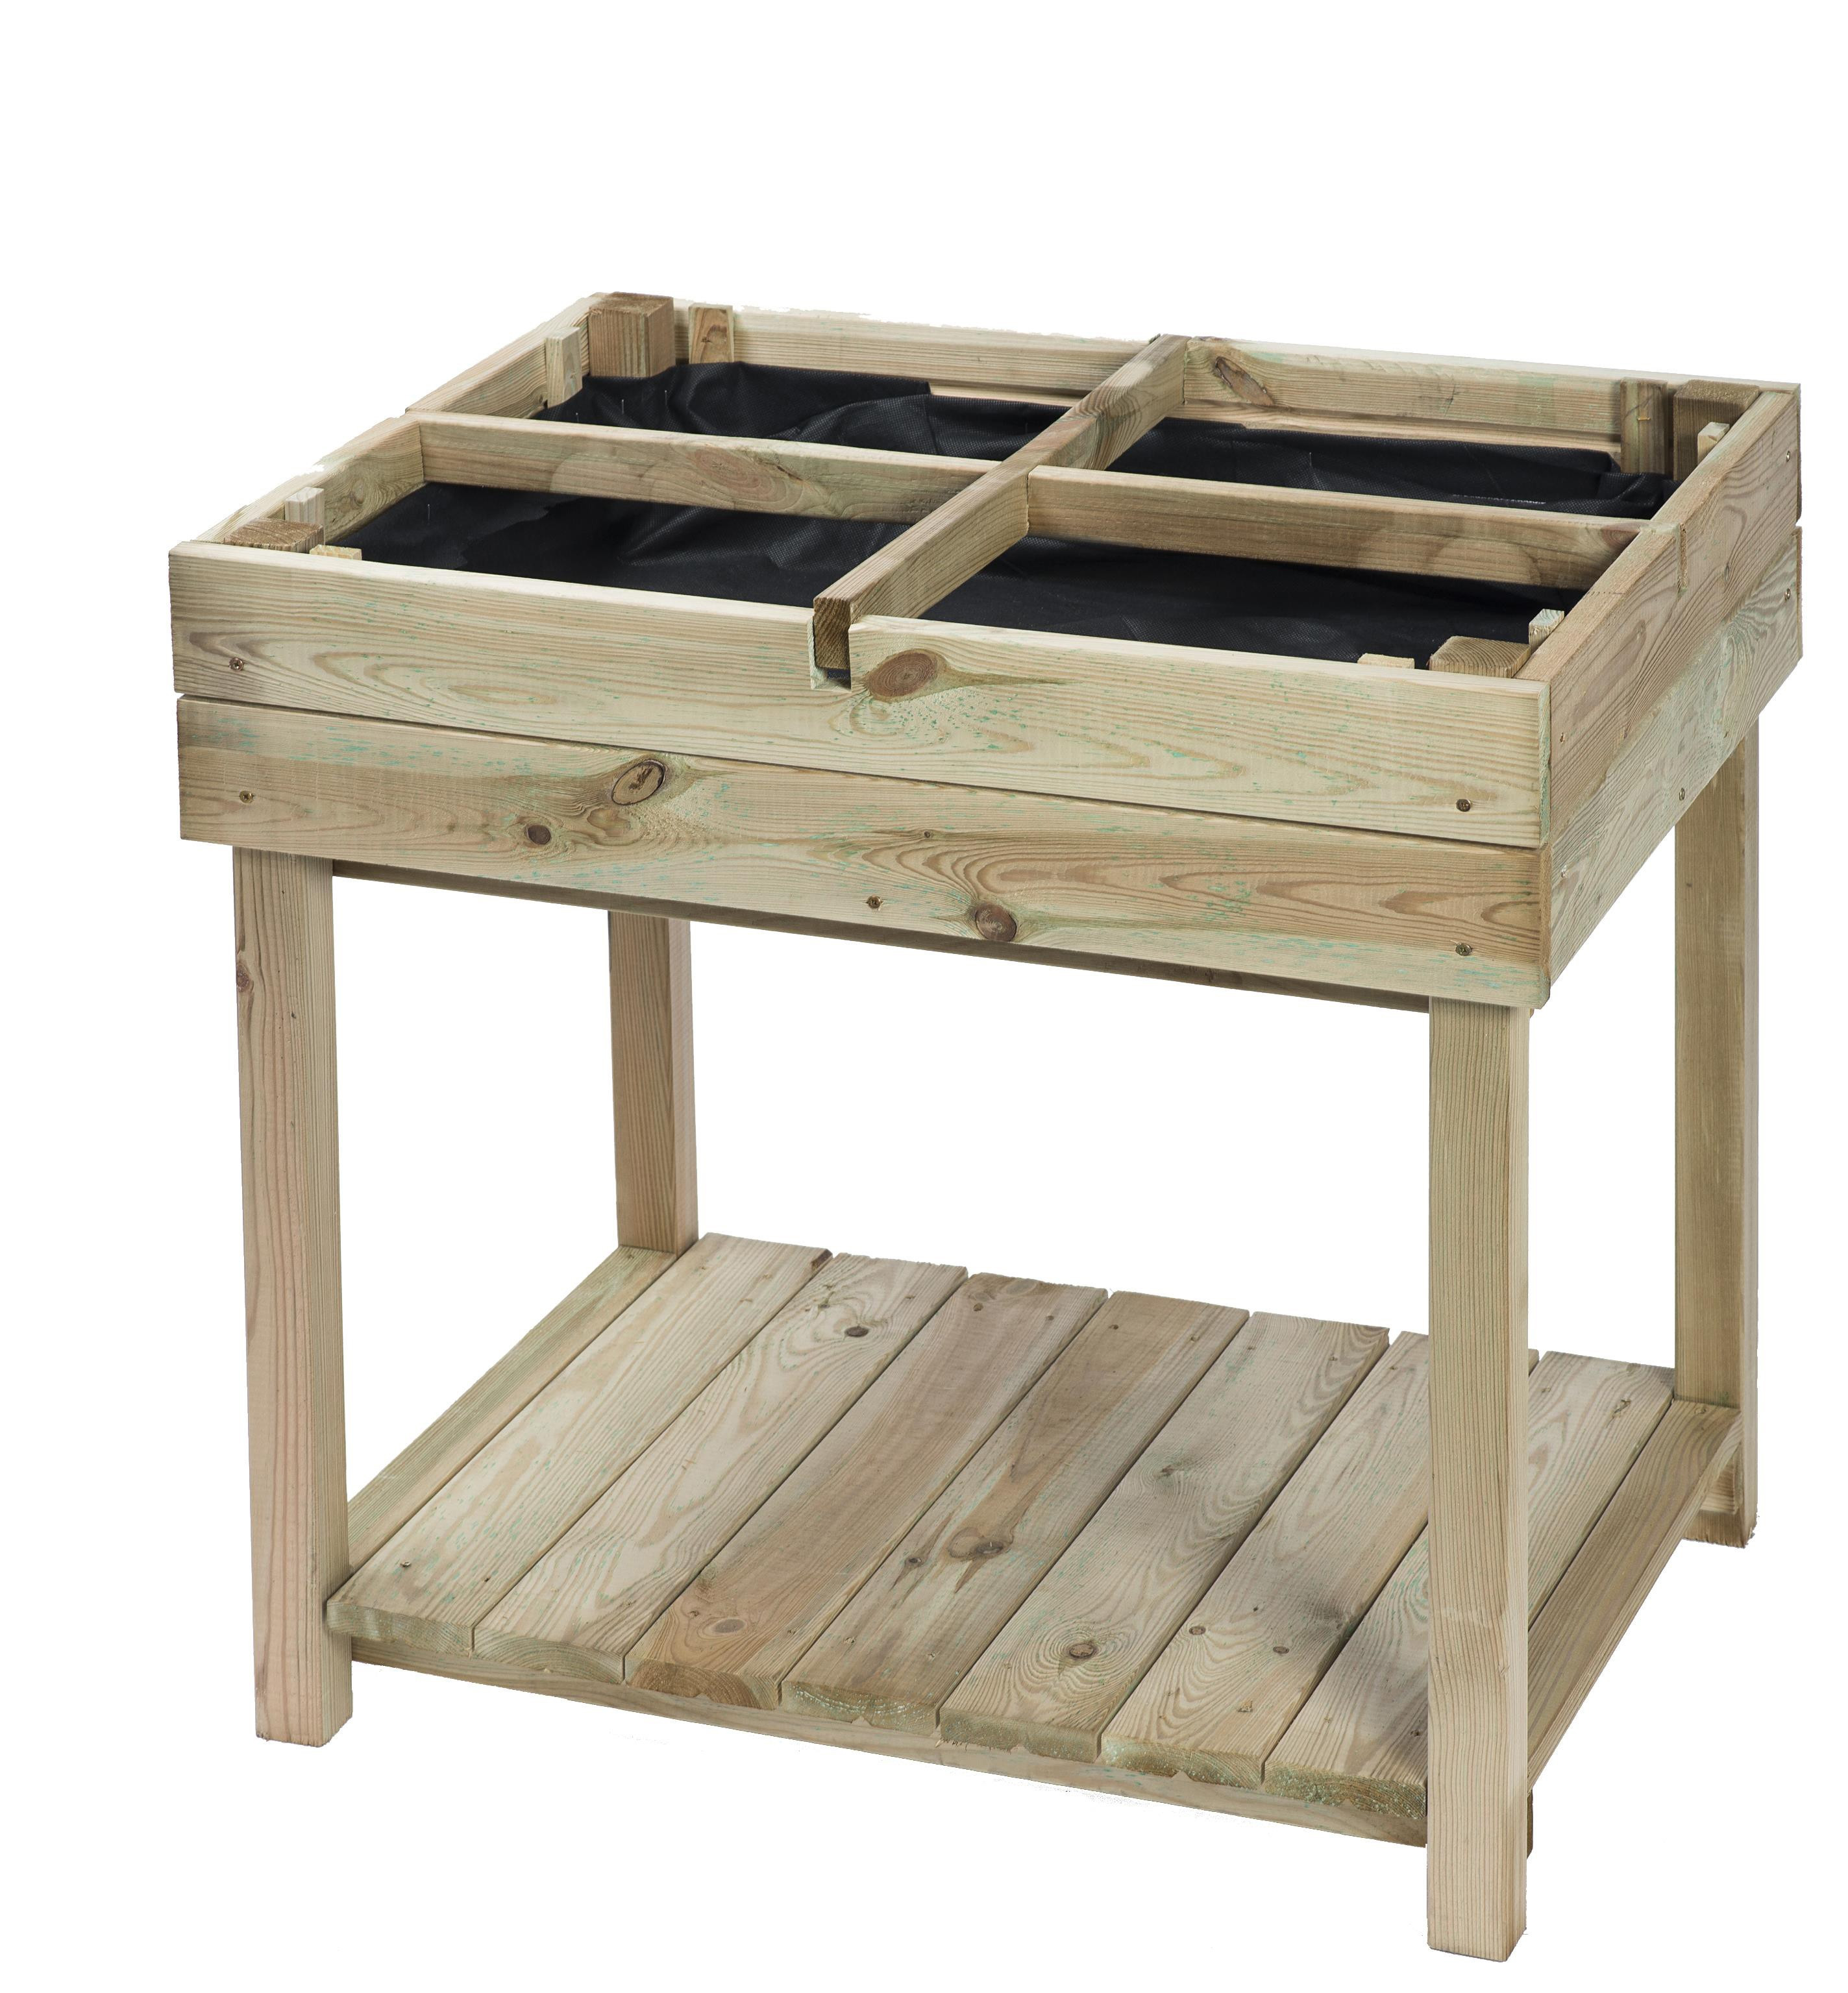 WOODEN GARDEN TABLE SQUARE 4 COMPARTMENTS H80X80X60CM